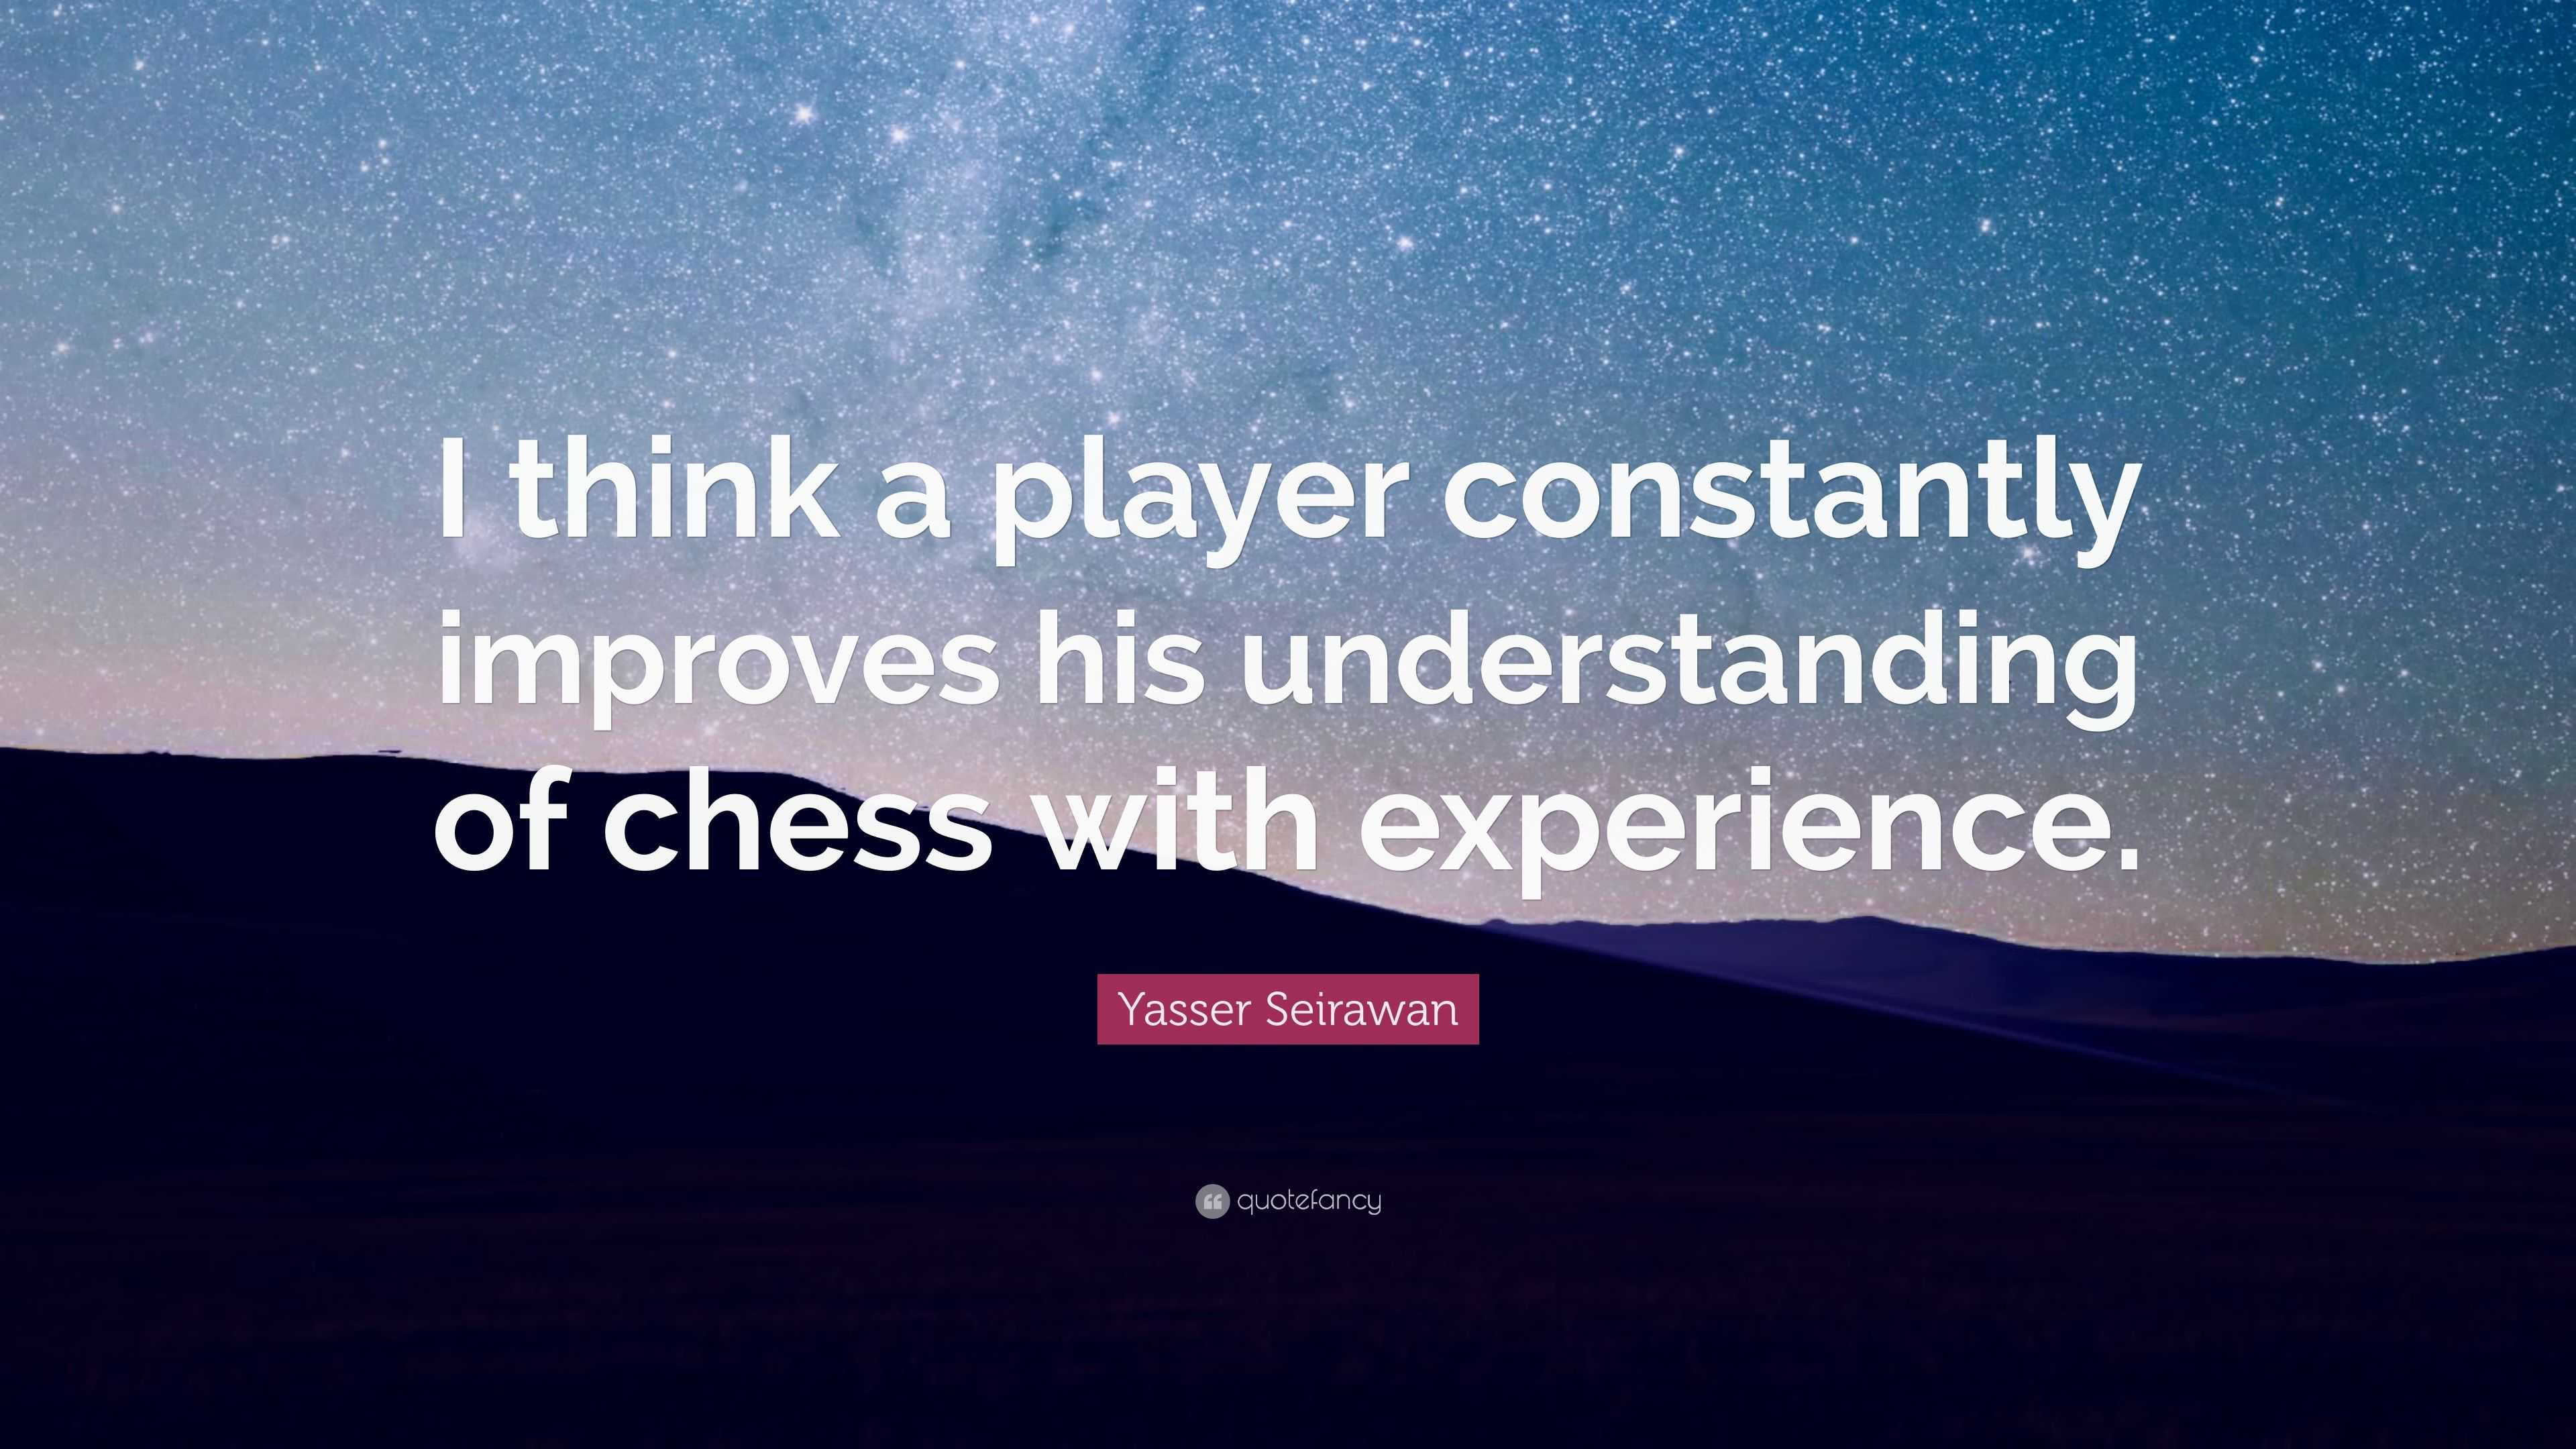 SayChessClassical's Blog • Why Winning in Chess is a Learning Opportunity •